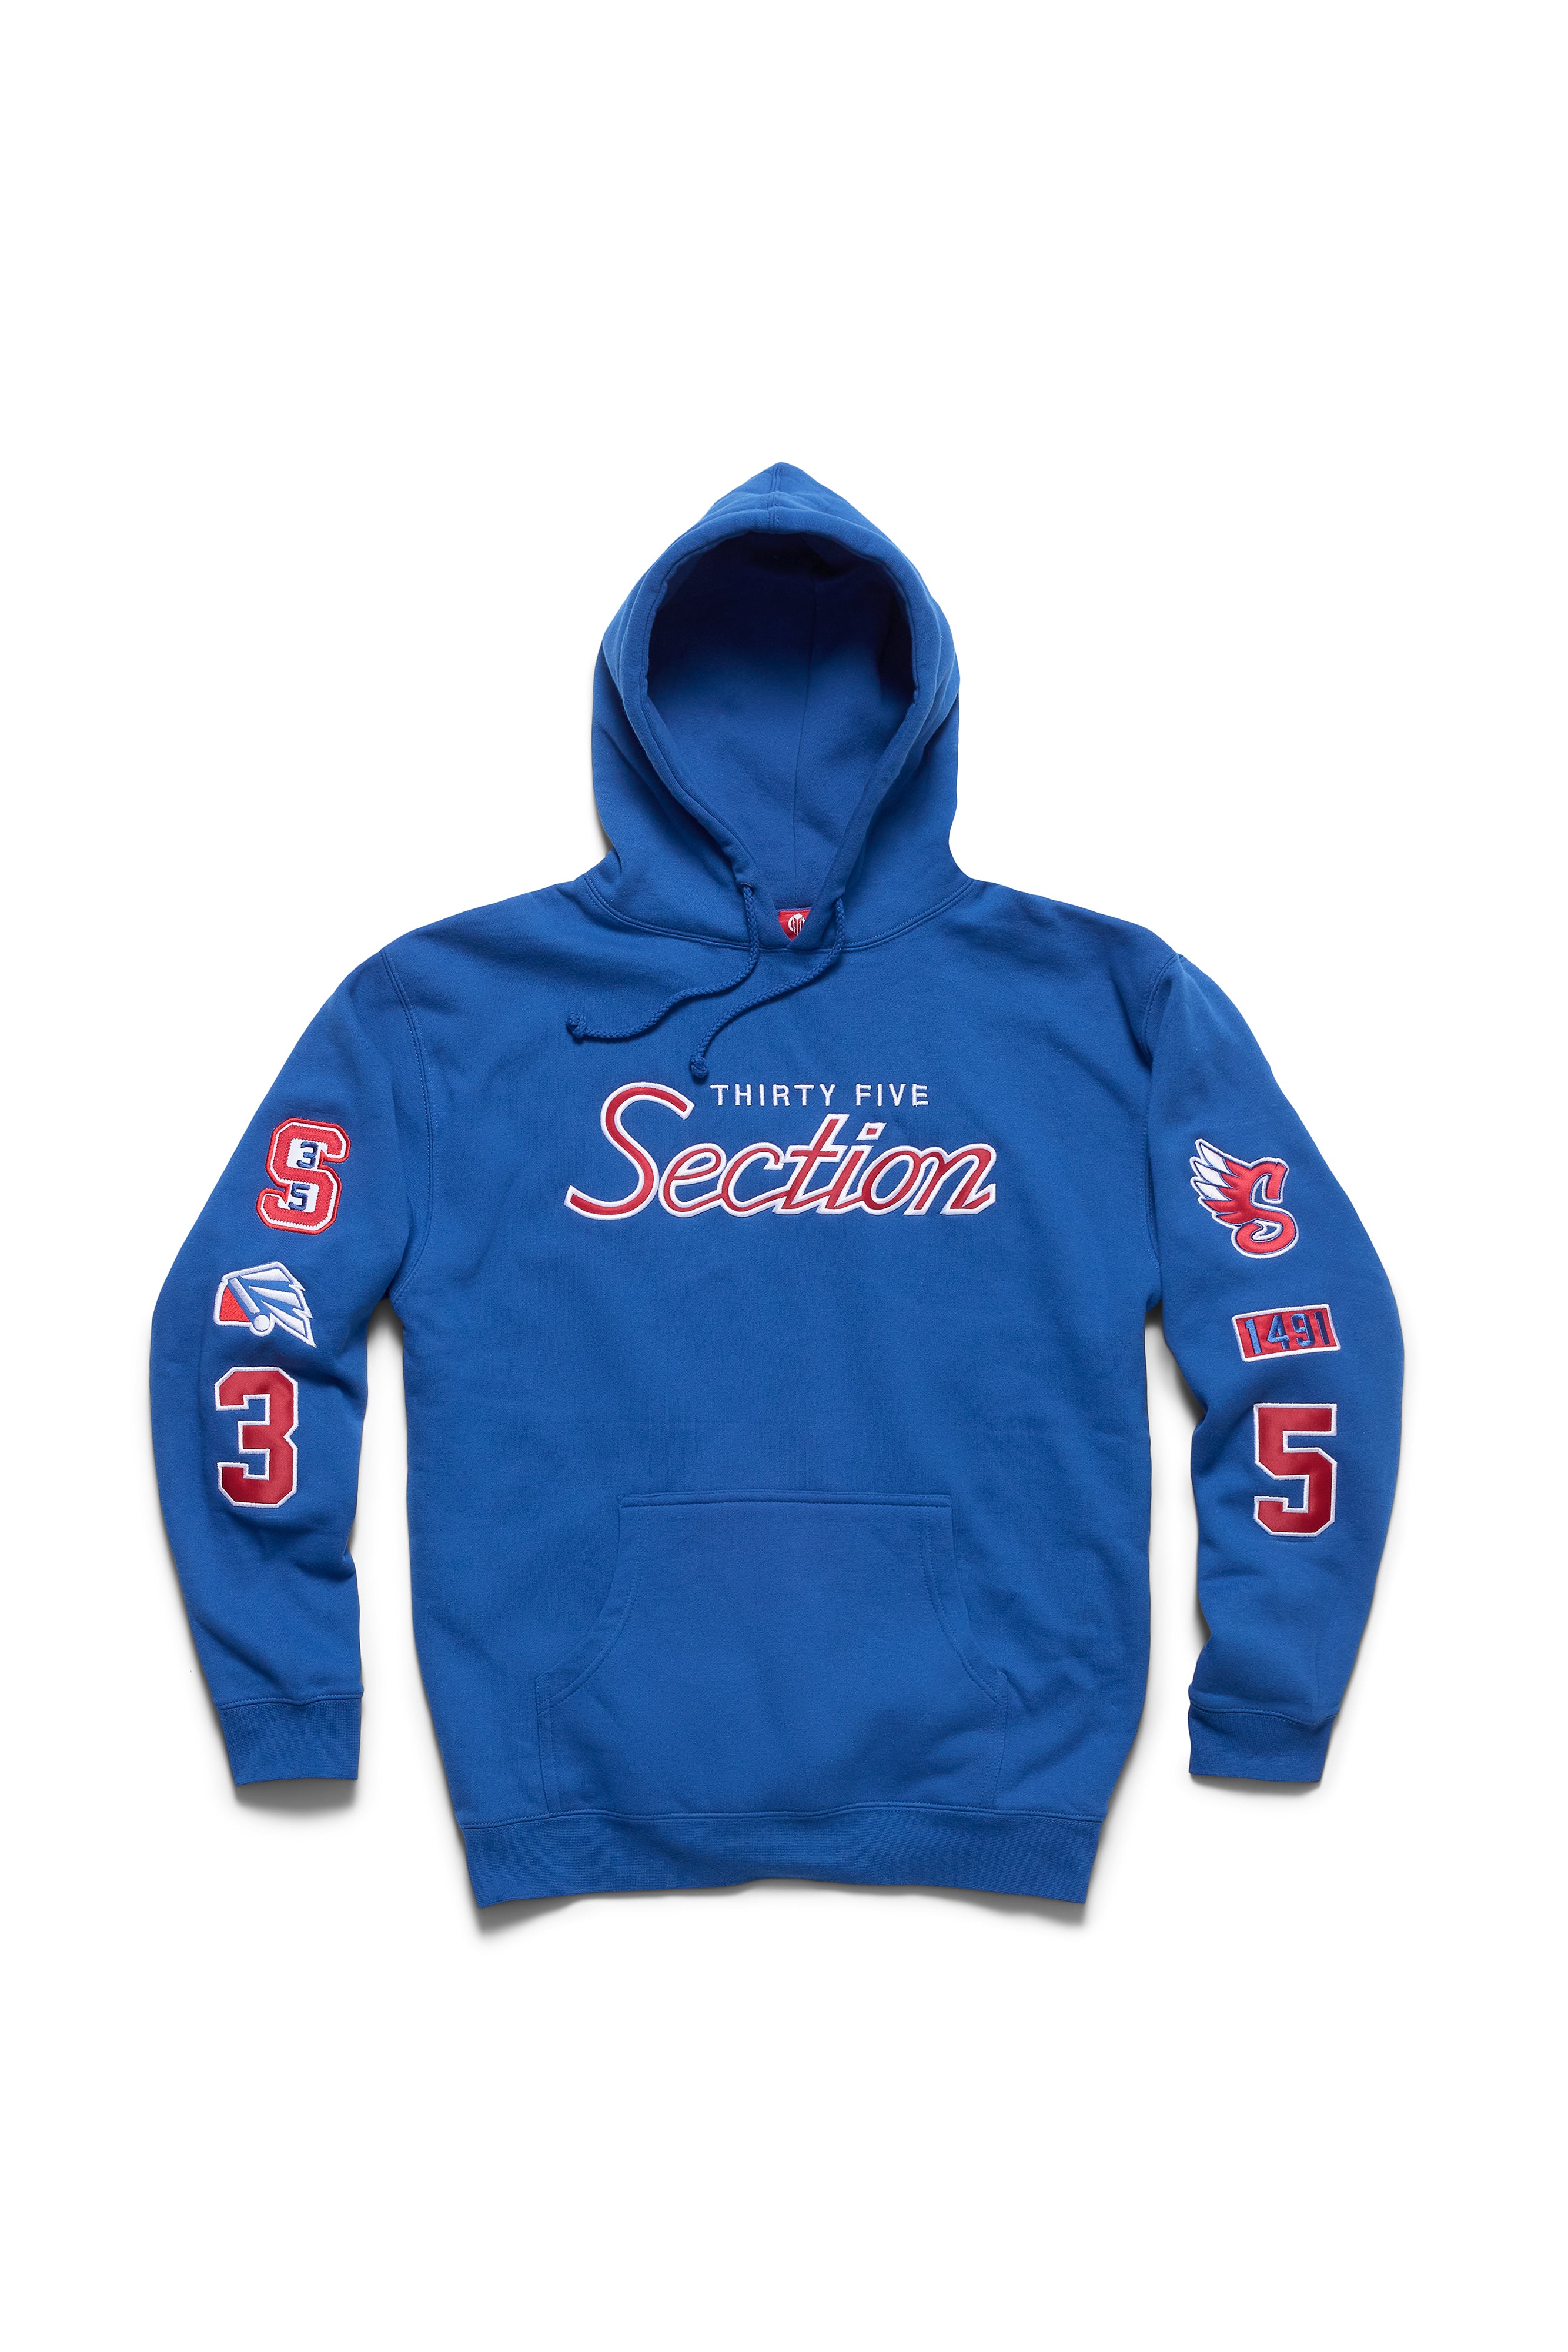 GOAT Patched Hoodie - Blue